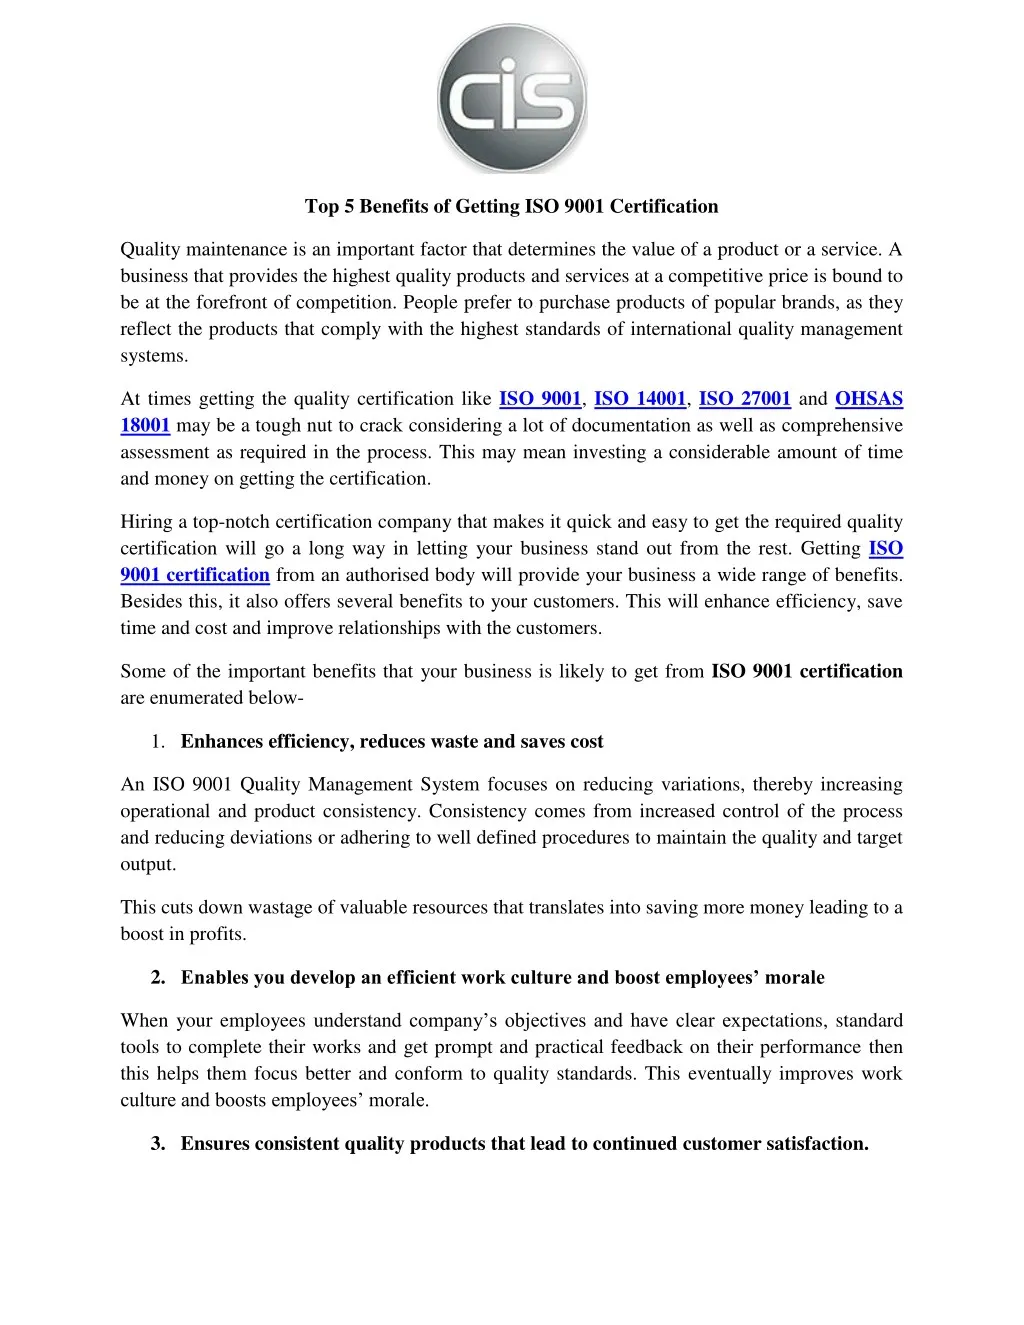 top 5 benefits of getting iso 9001 certification